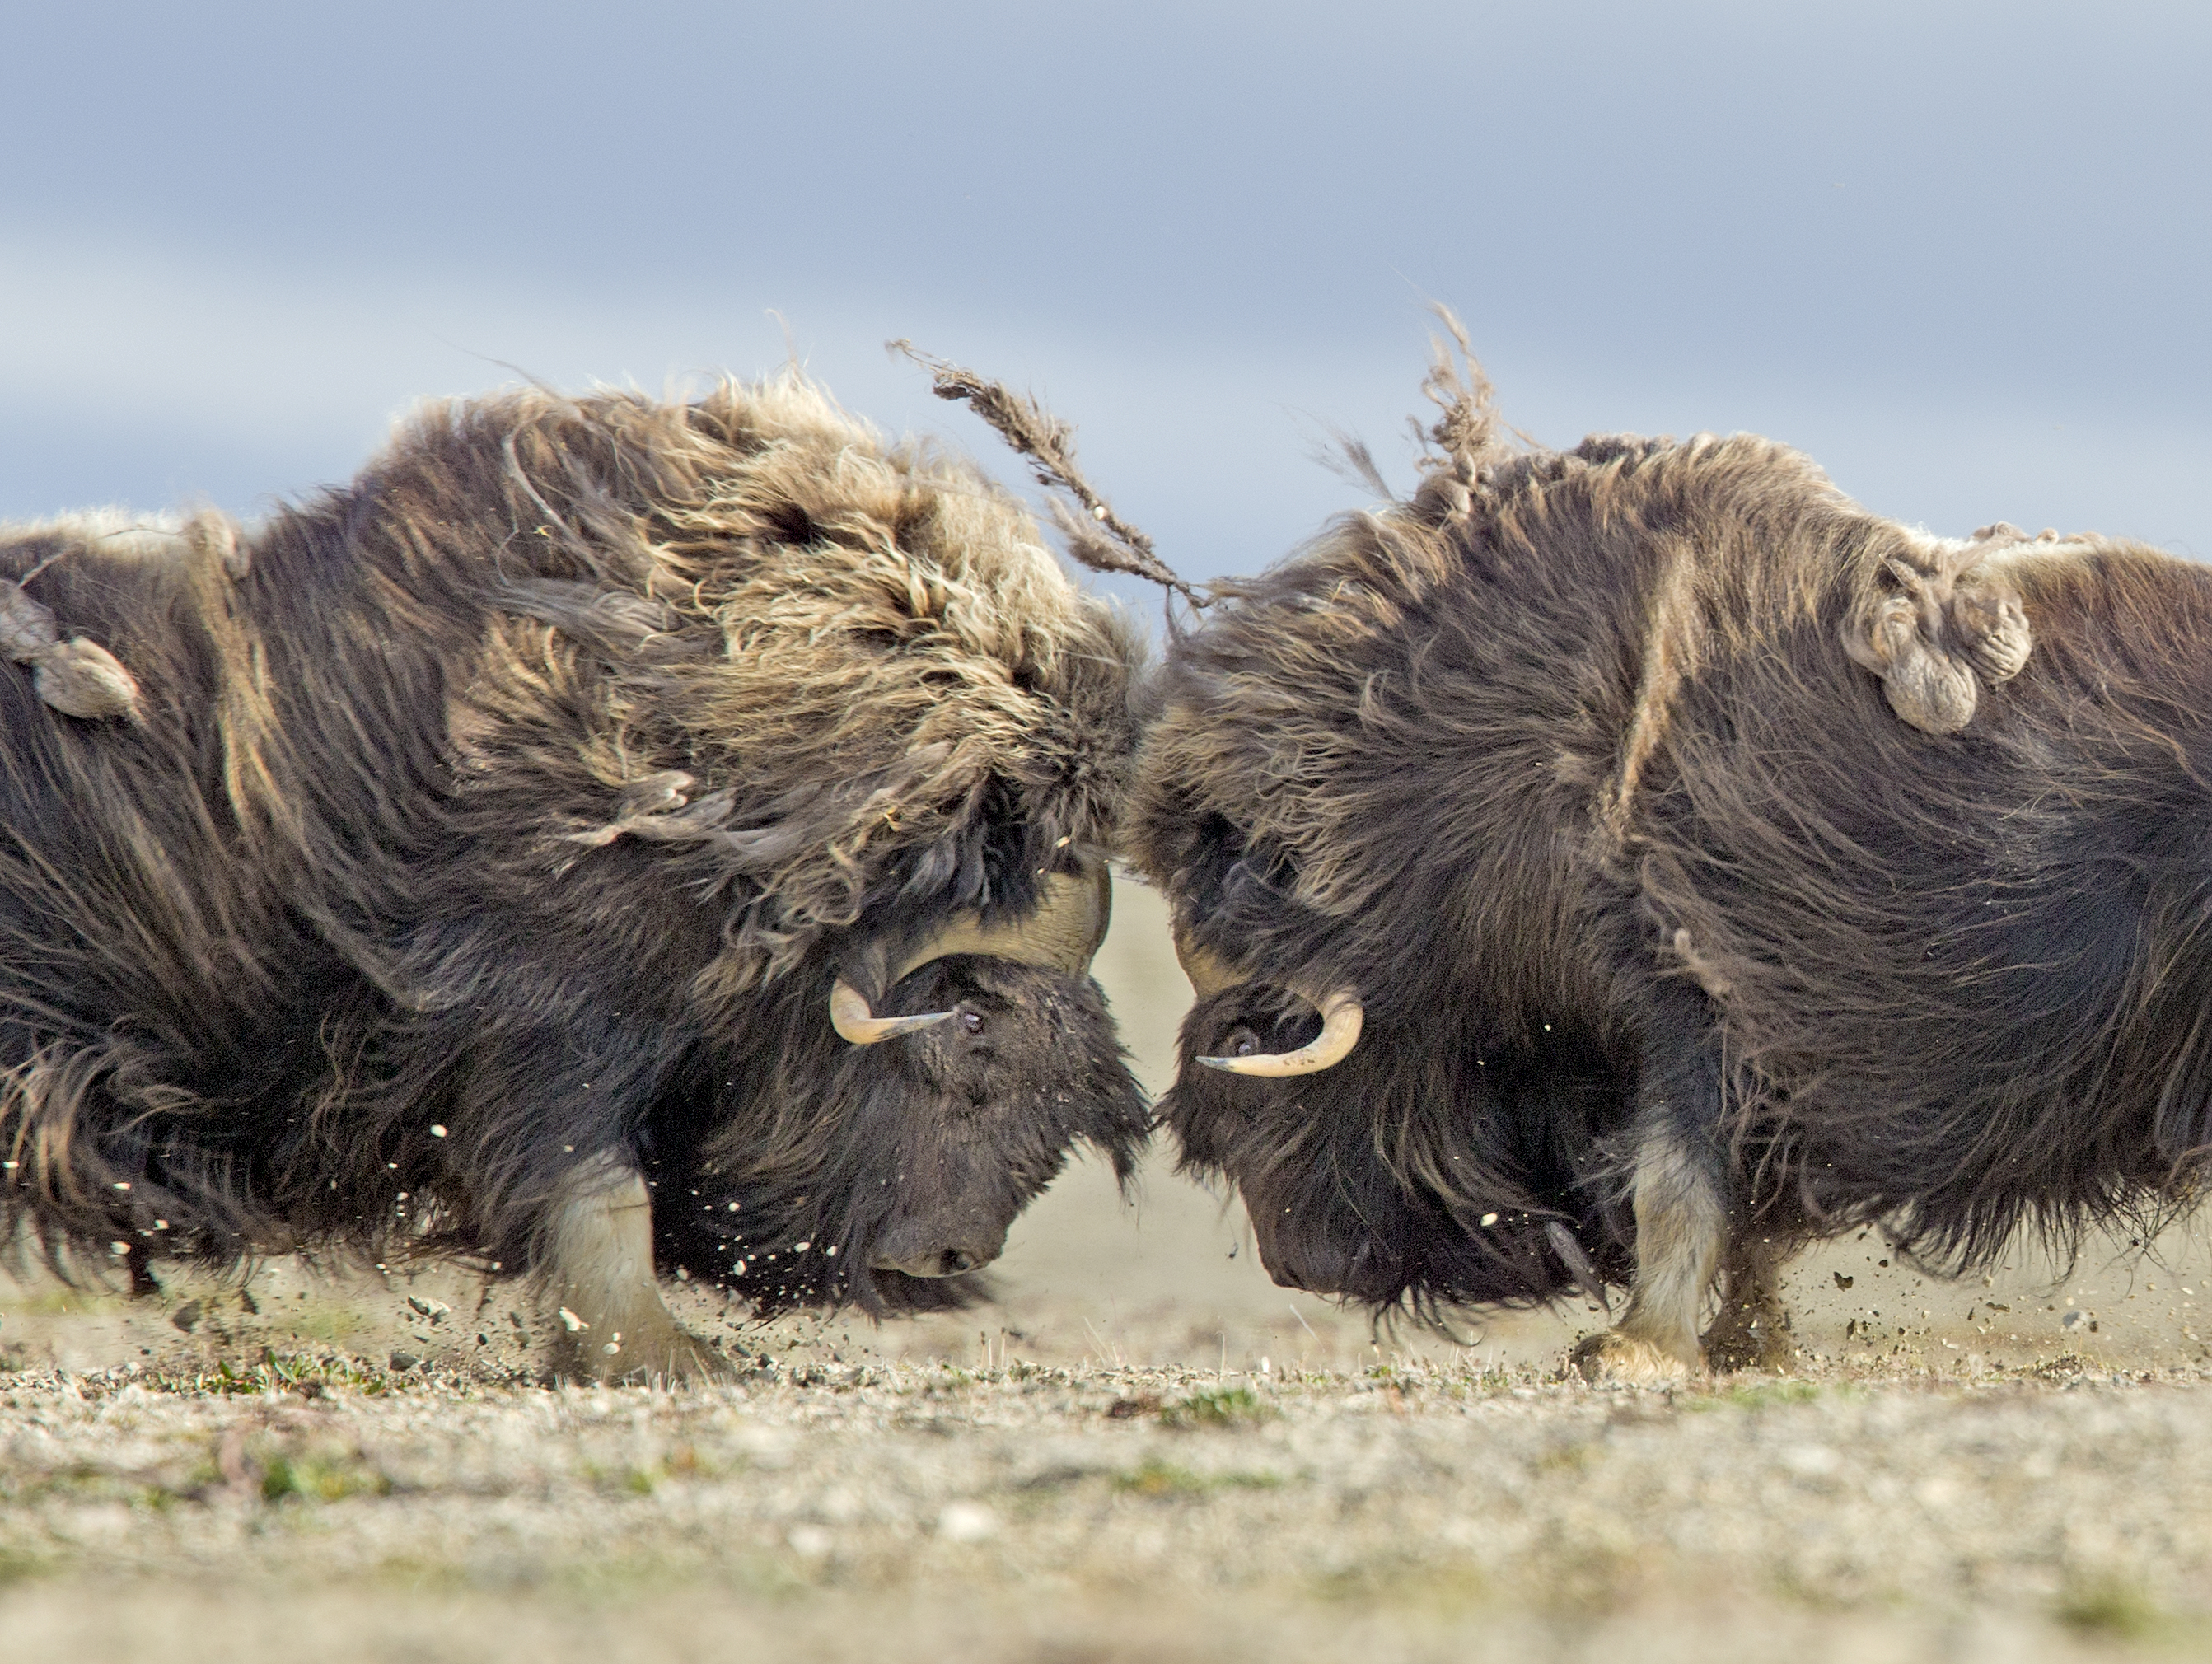 Two males fighting for herd dominance - they collide into one-another, banging heads and fighting until the winner claims the herd!